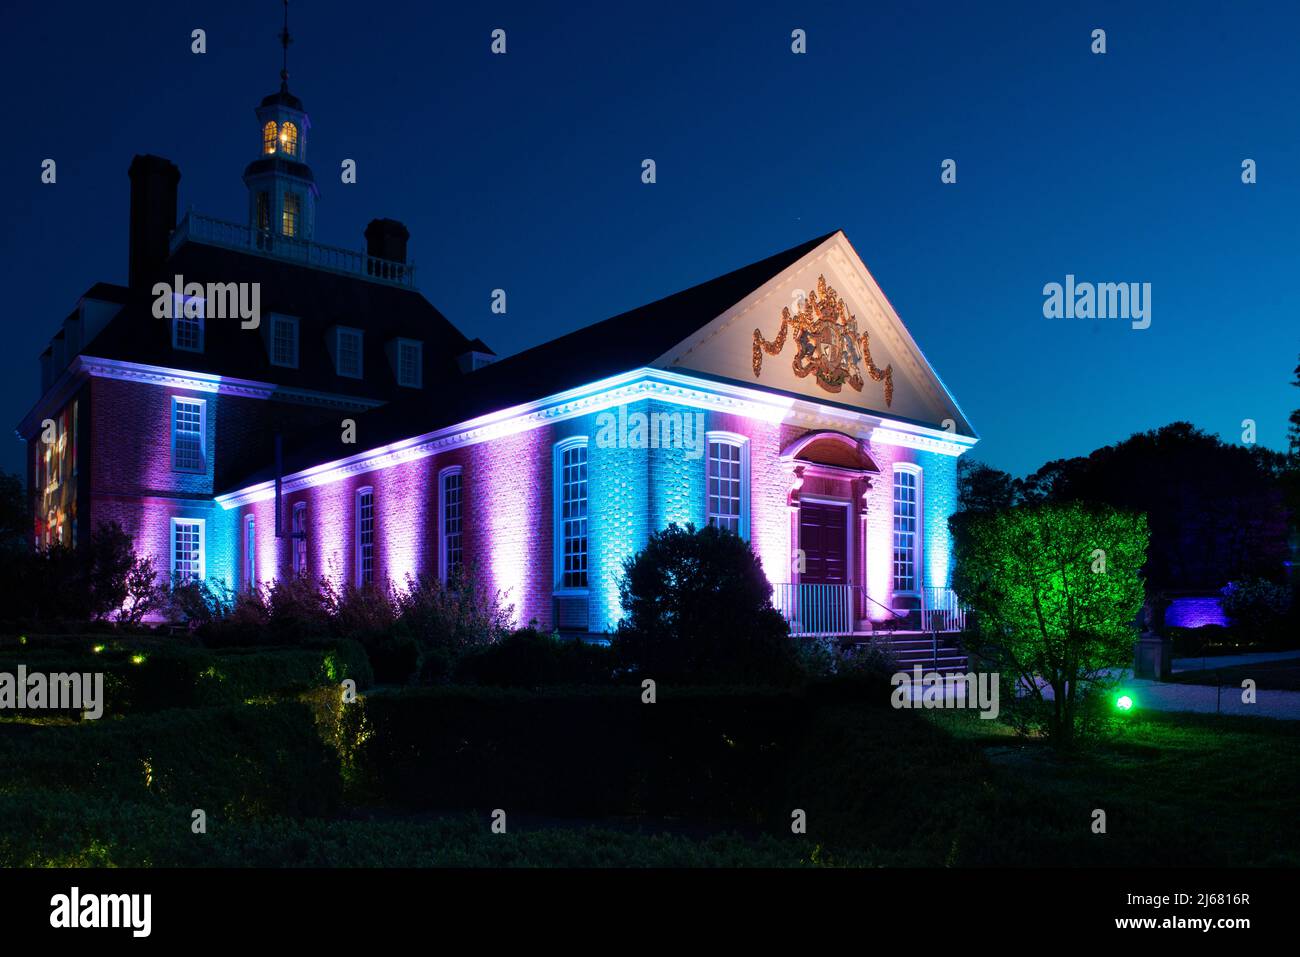 Governors Palace Garden View, CW Light show at night. Colonial Williamsburg. Colorful and dramatic spotlights surround the neoclassical architecture. Stock Photo